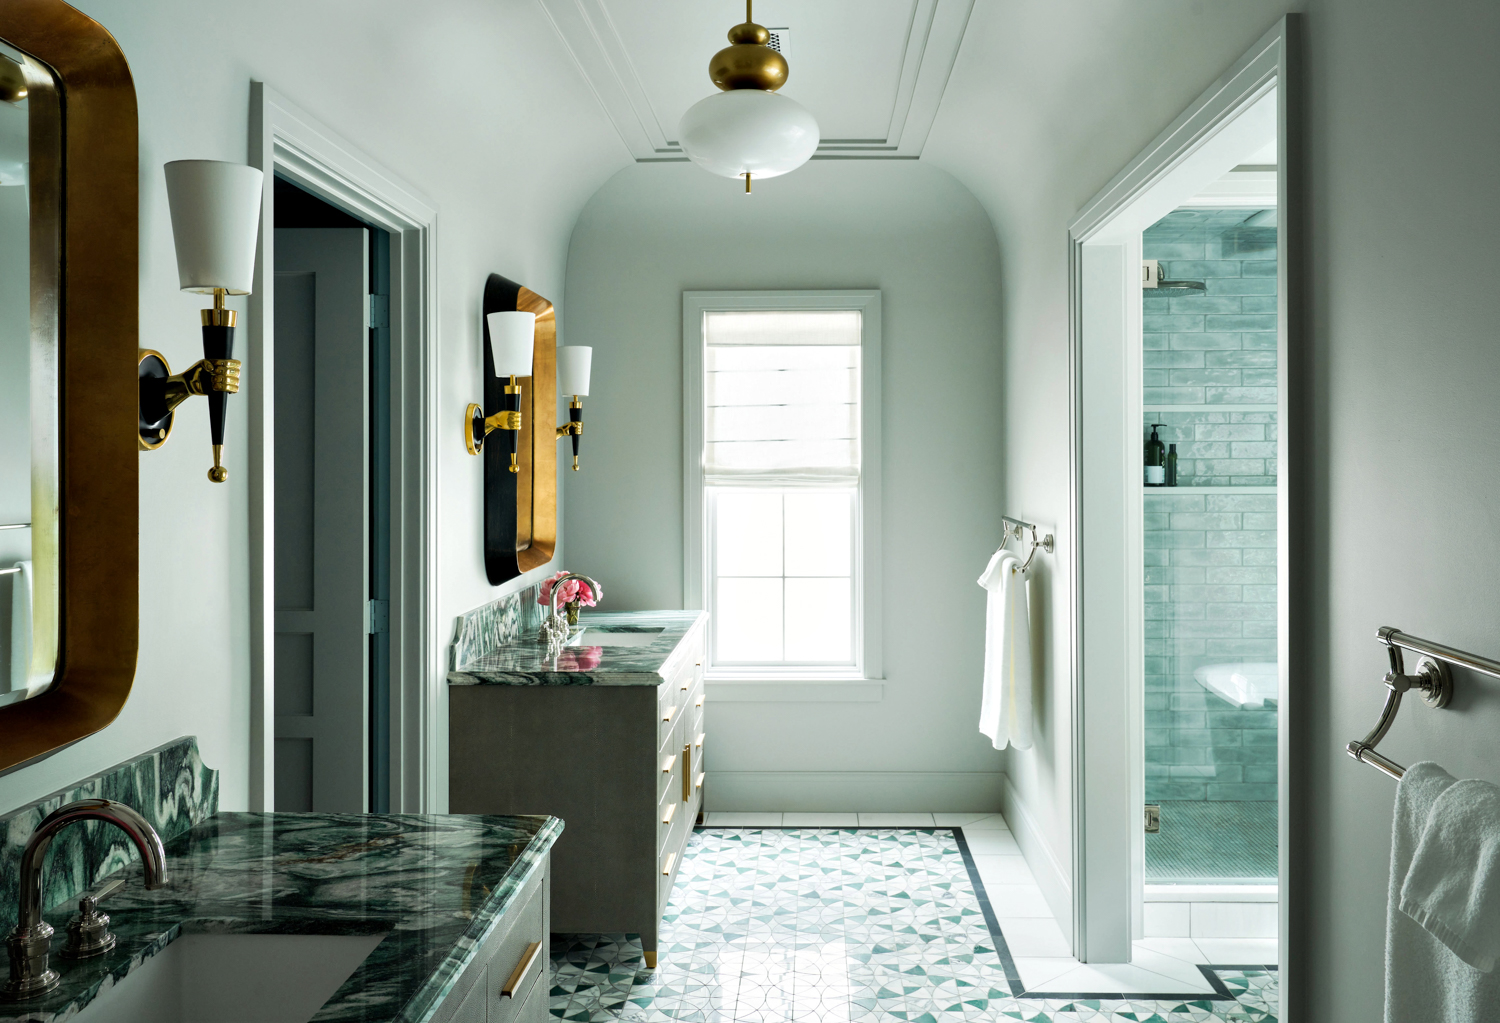 Grey bathroom with mosiac tile floors and coffered ceiling. RED Winner.